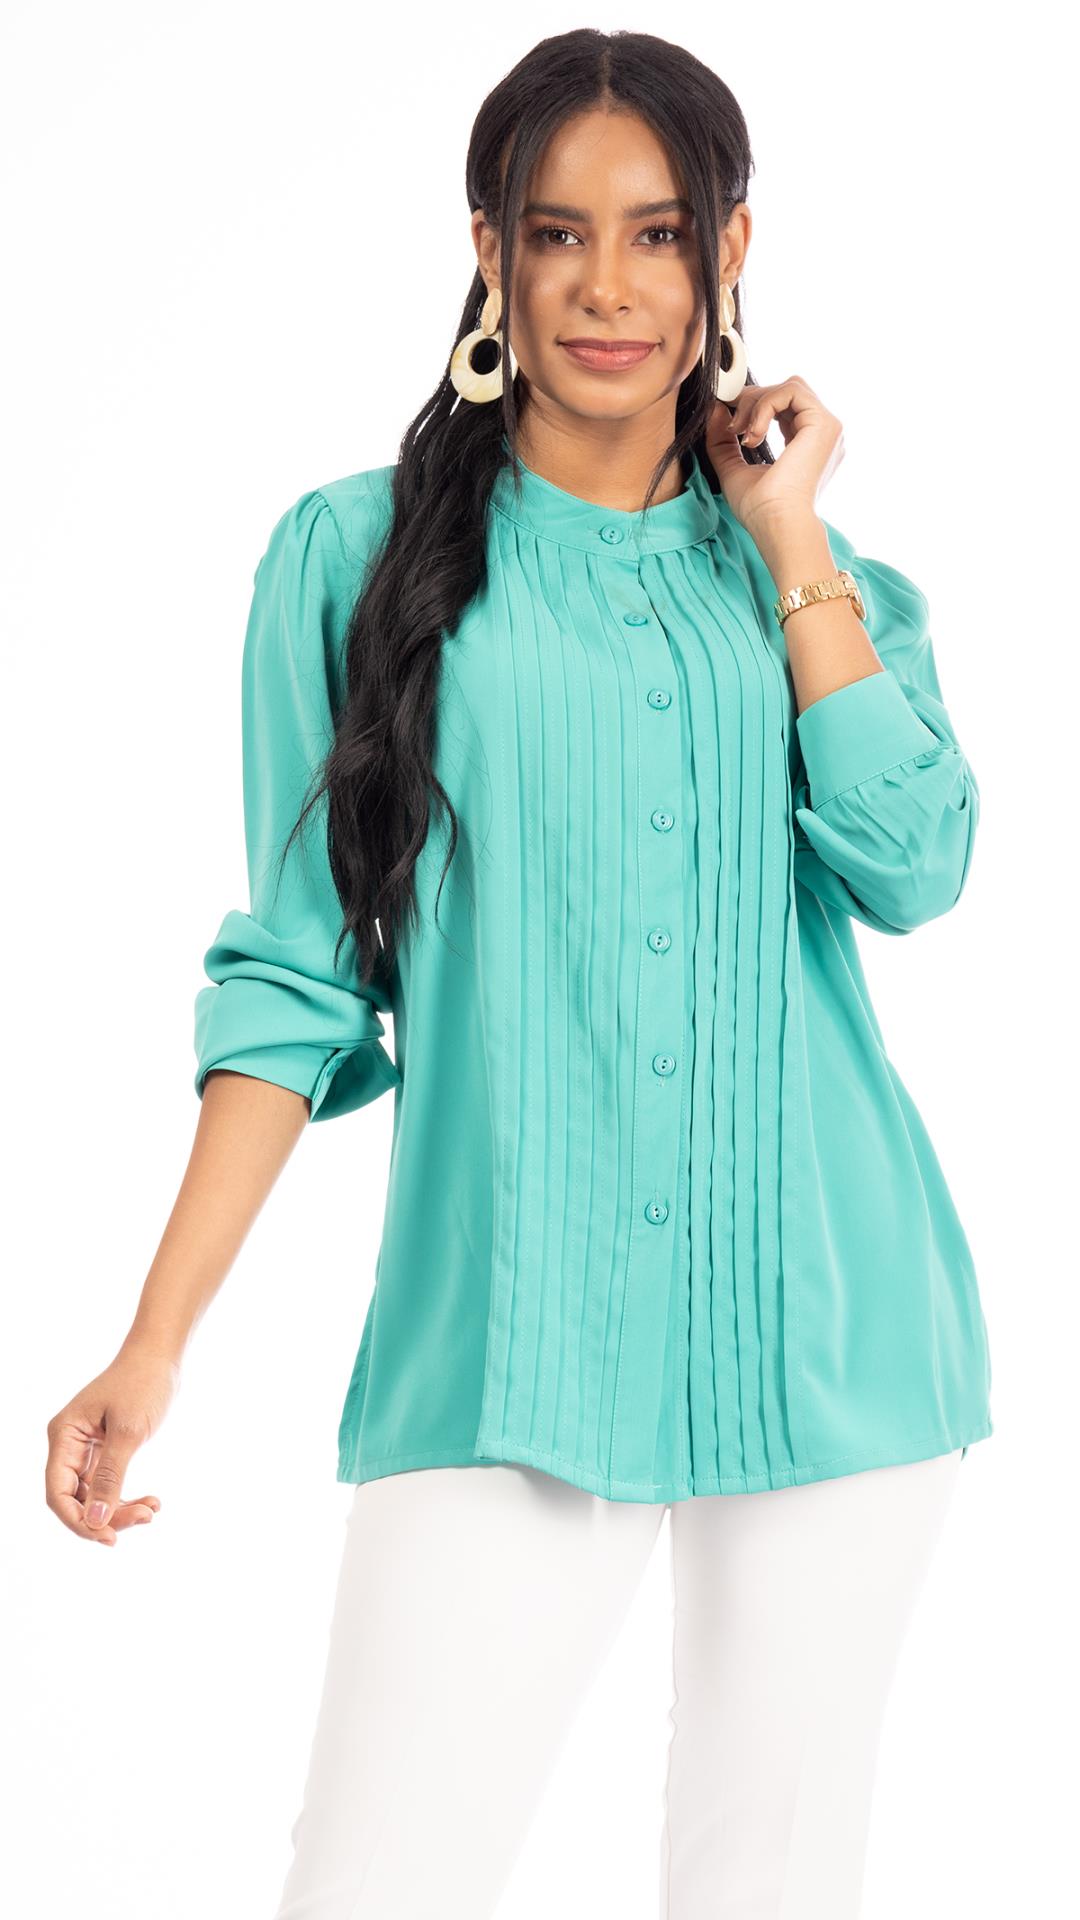 Plain shirt with distinctive design on the front 